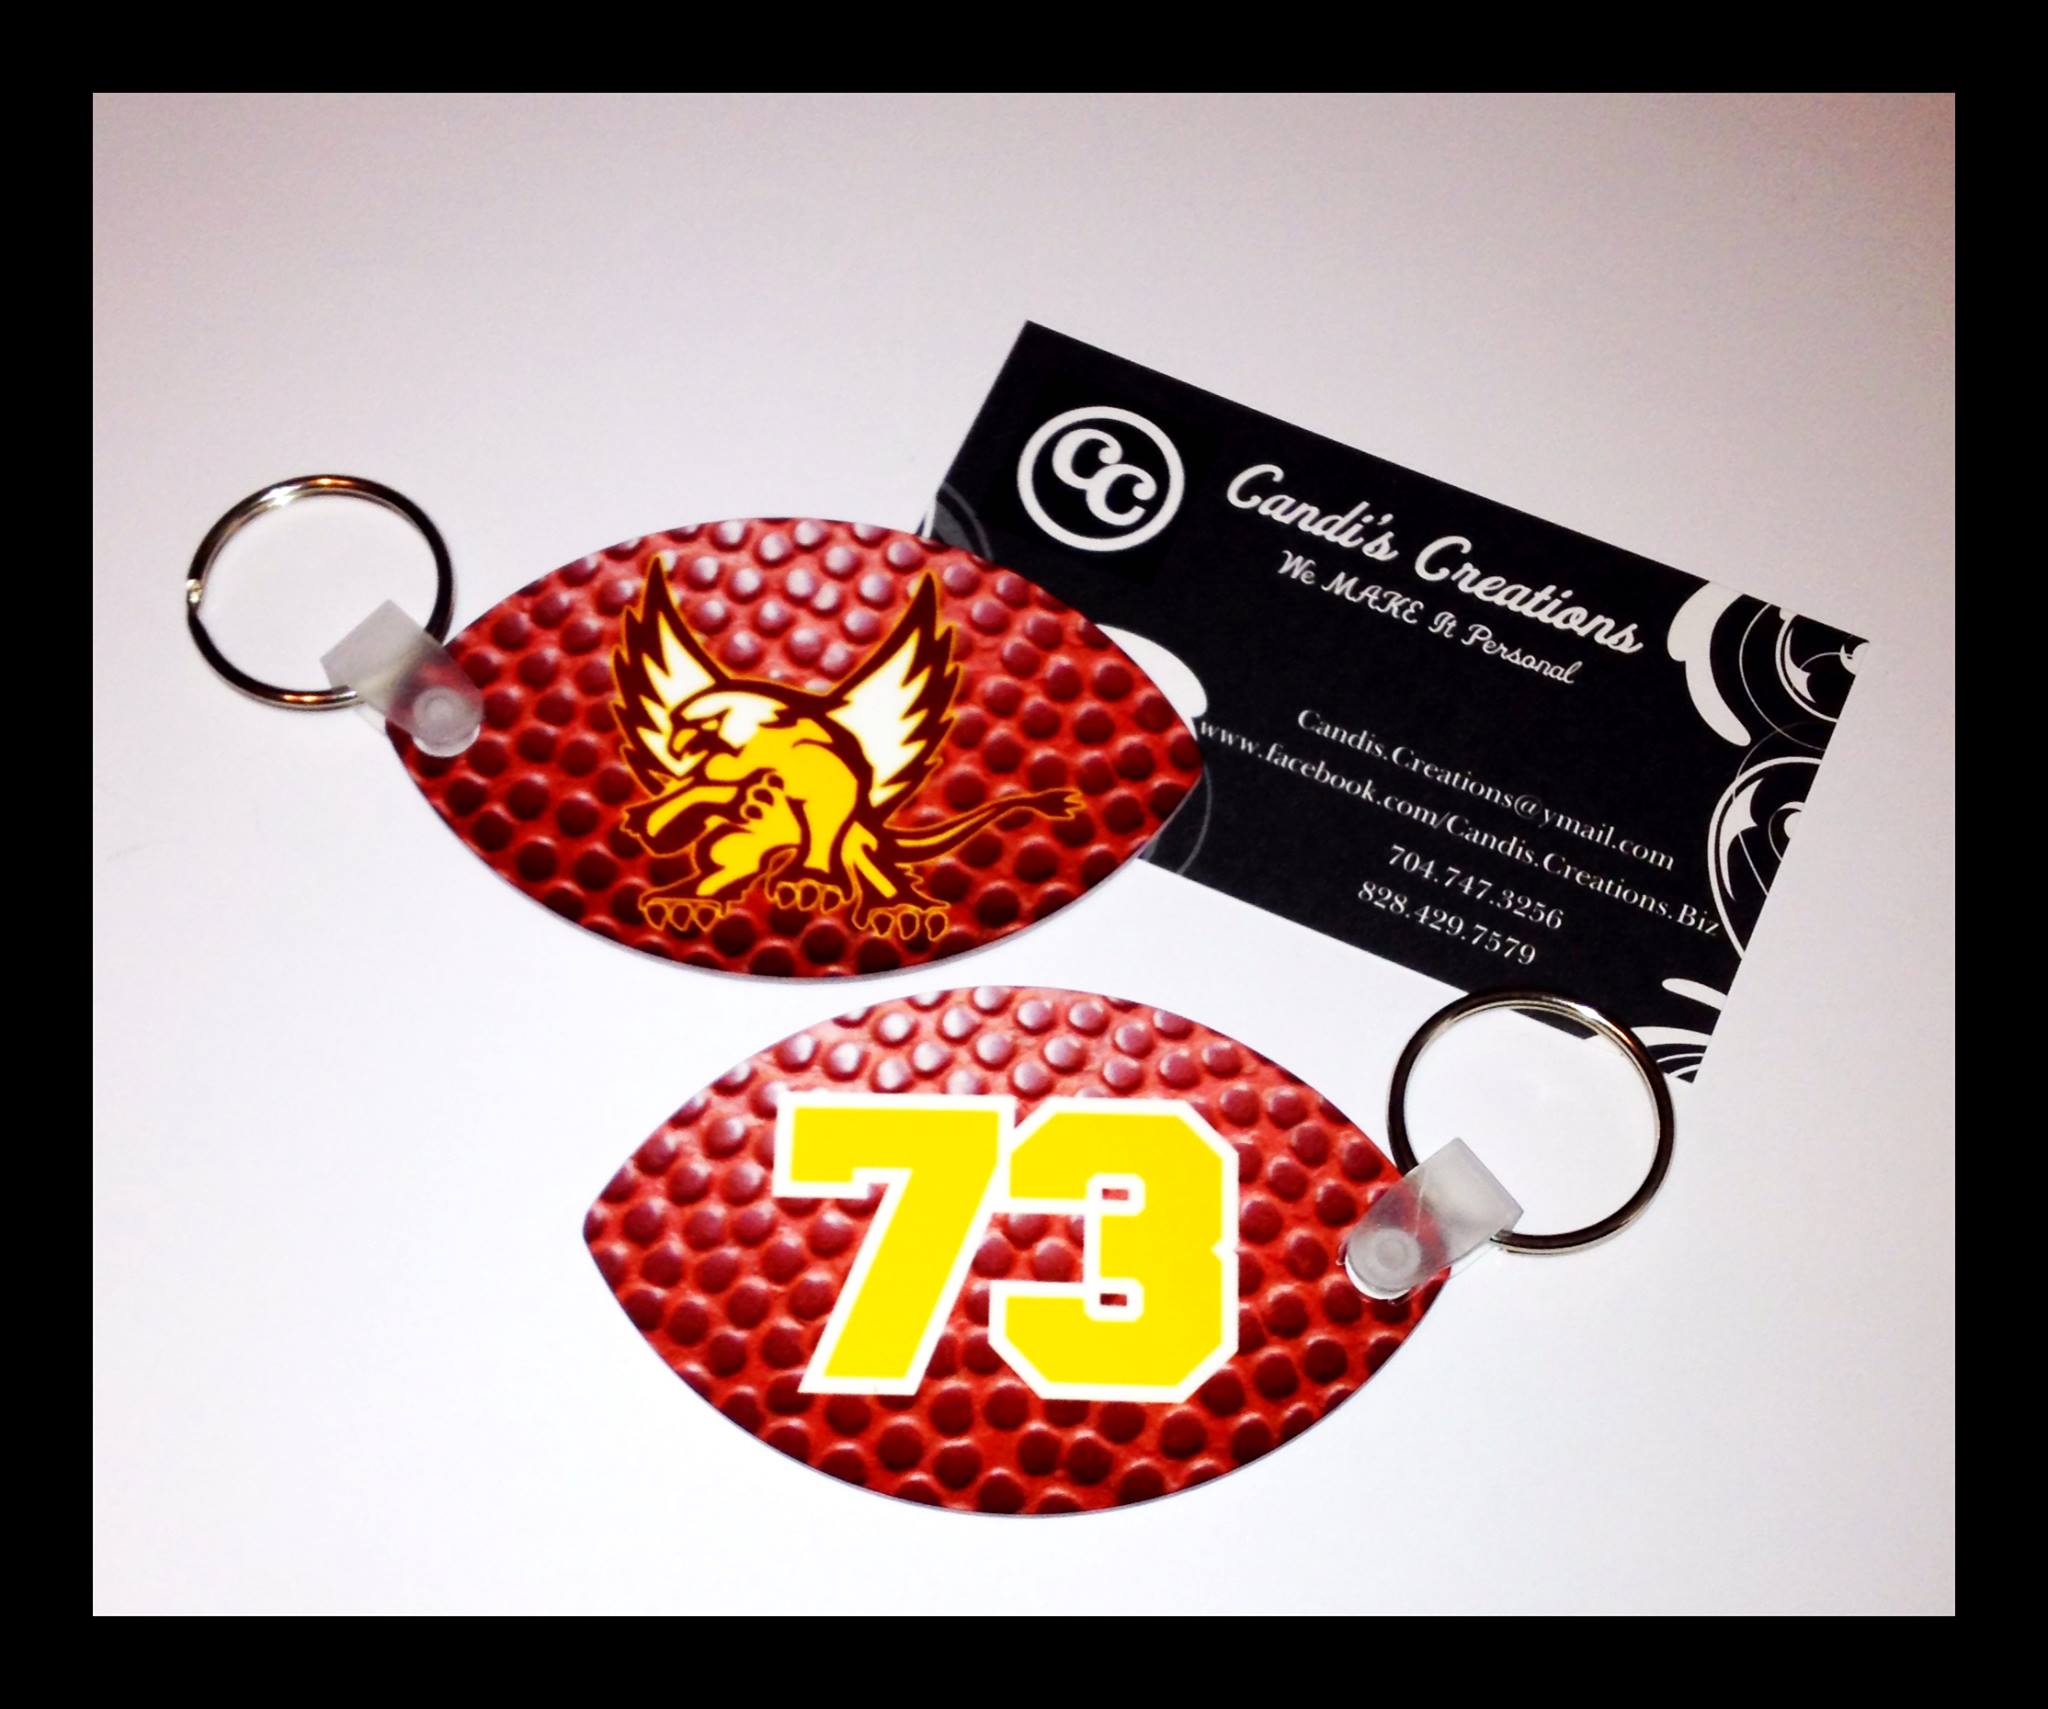 School Key Tags made with sublimation printing